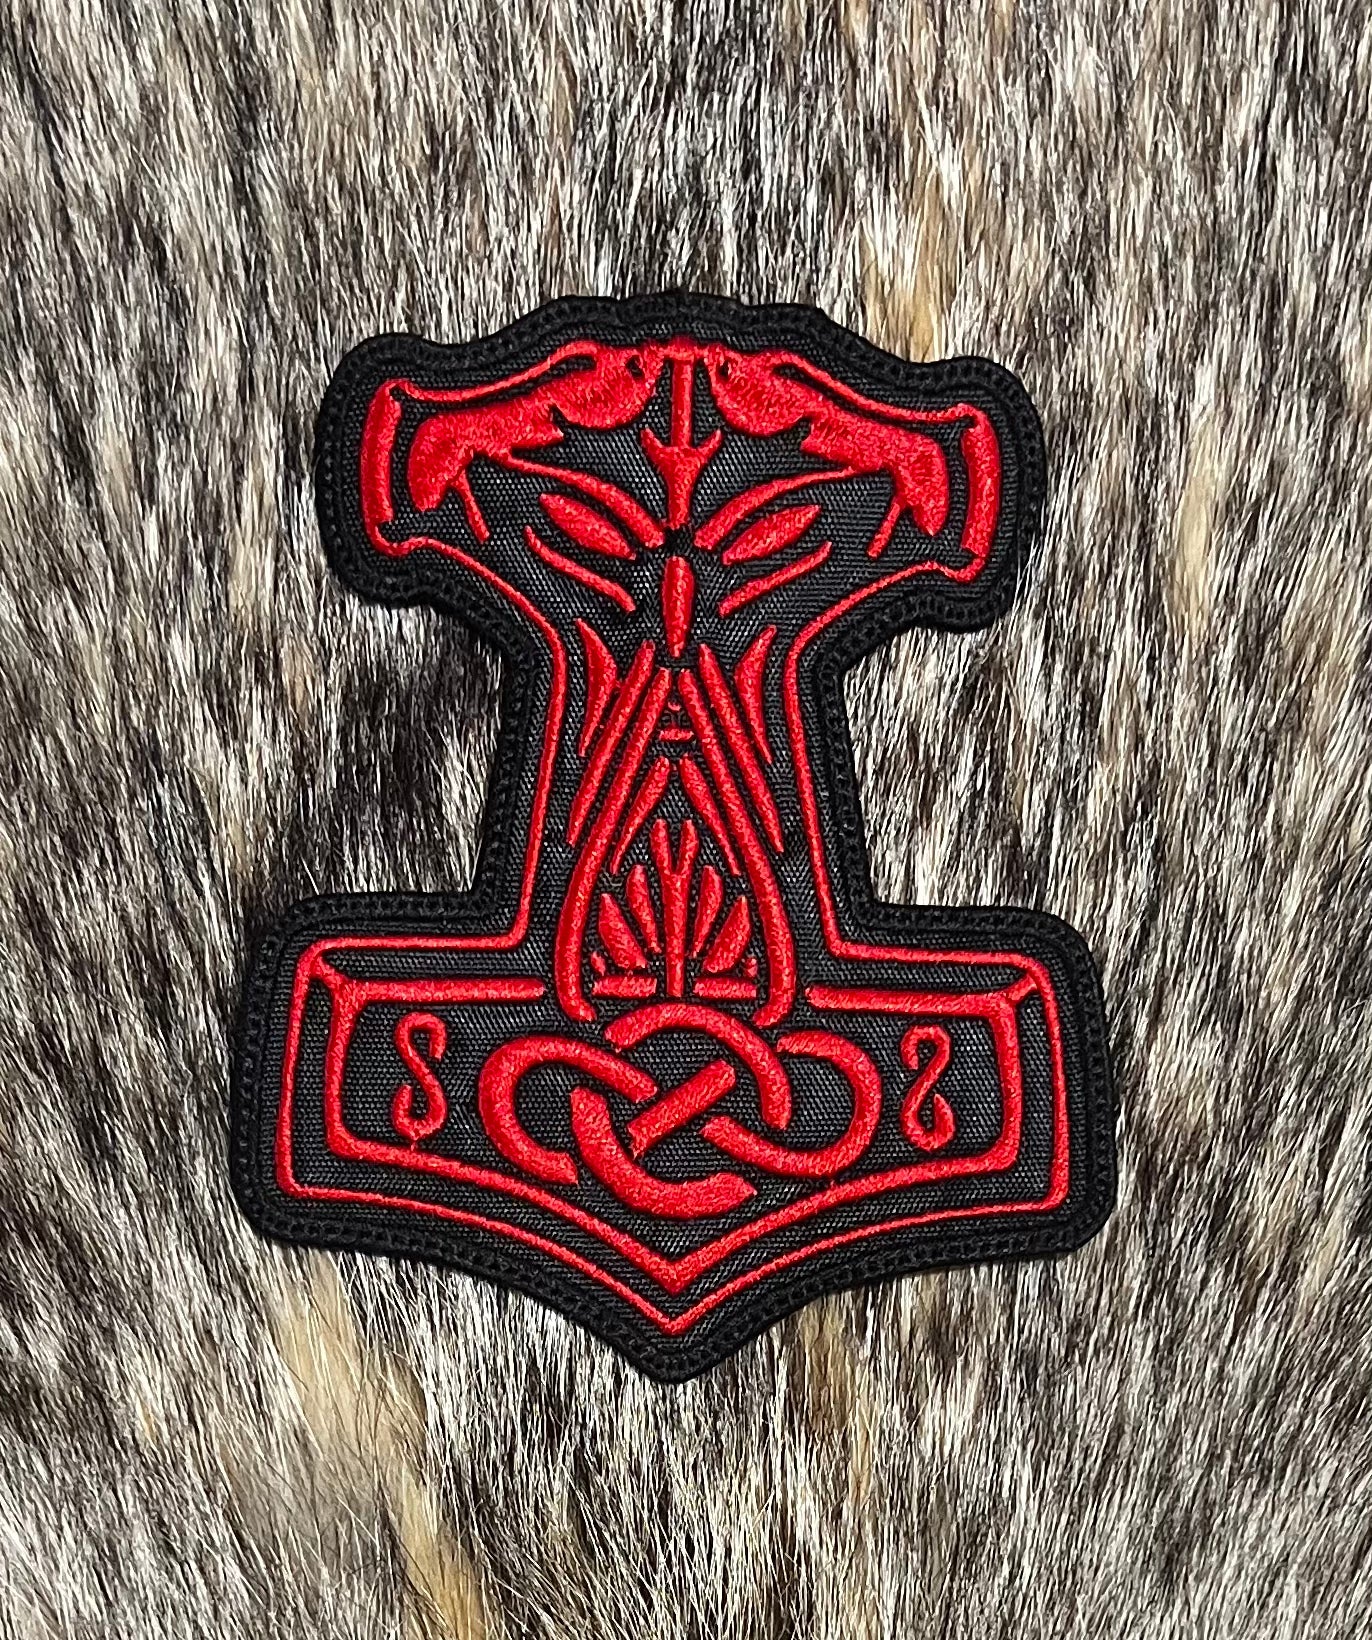 Thors Hammer Cut Out Patch